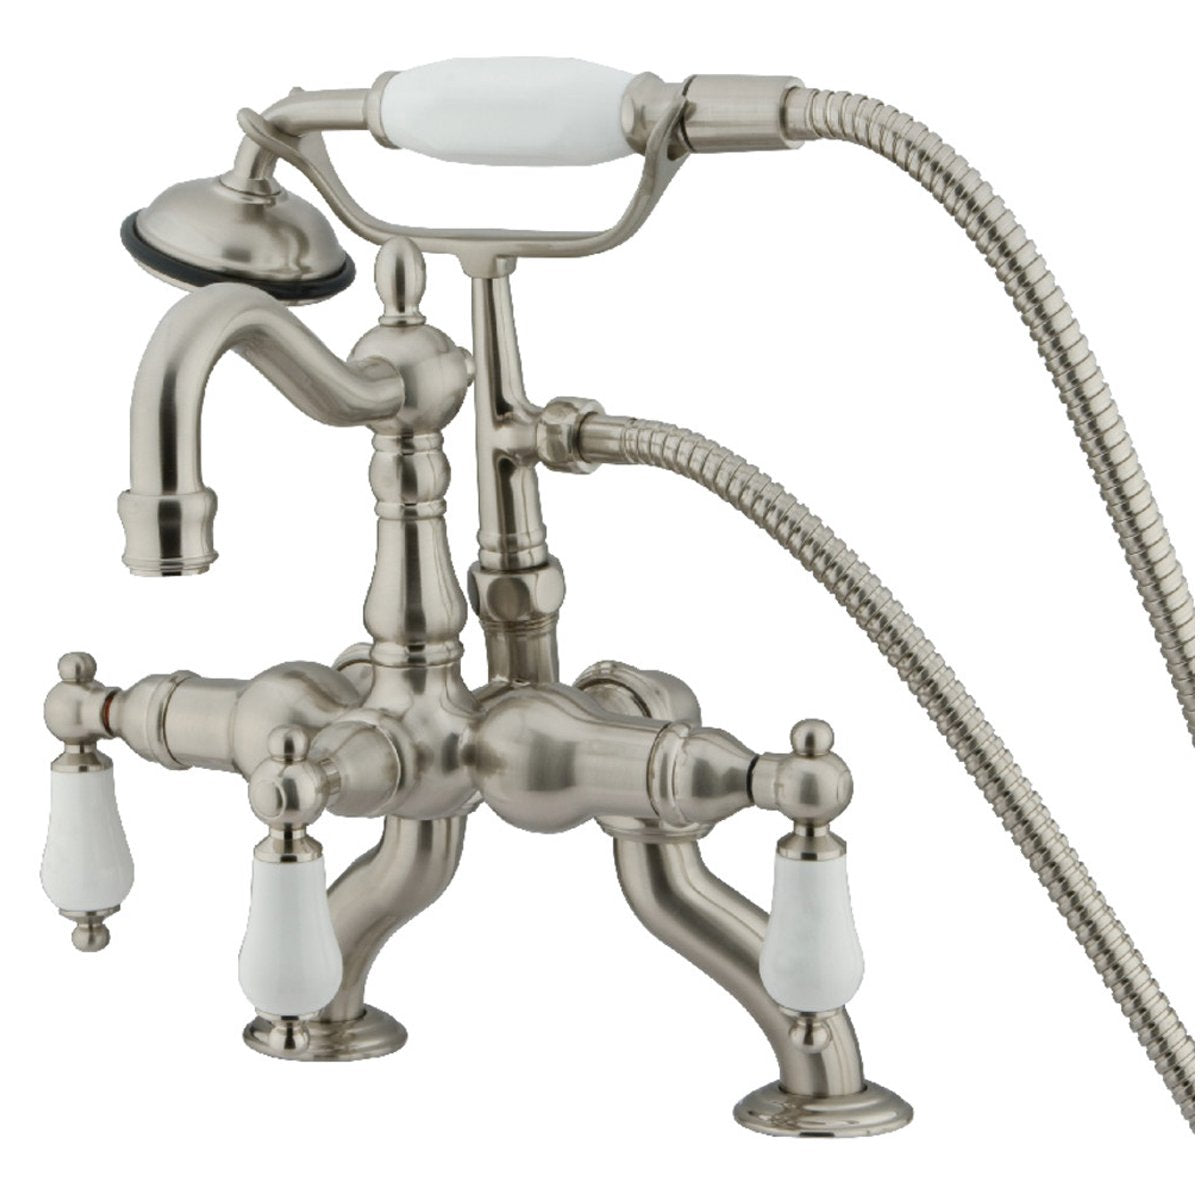 Kingston Brass CC2011TX-P Vintage Clawfoot  11" x 6" x 4.75" Tub Faucet with Hand Shower